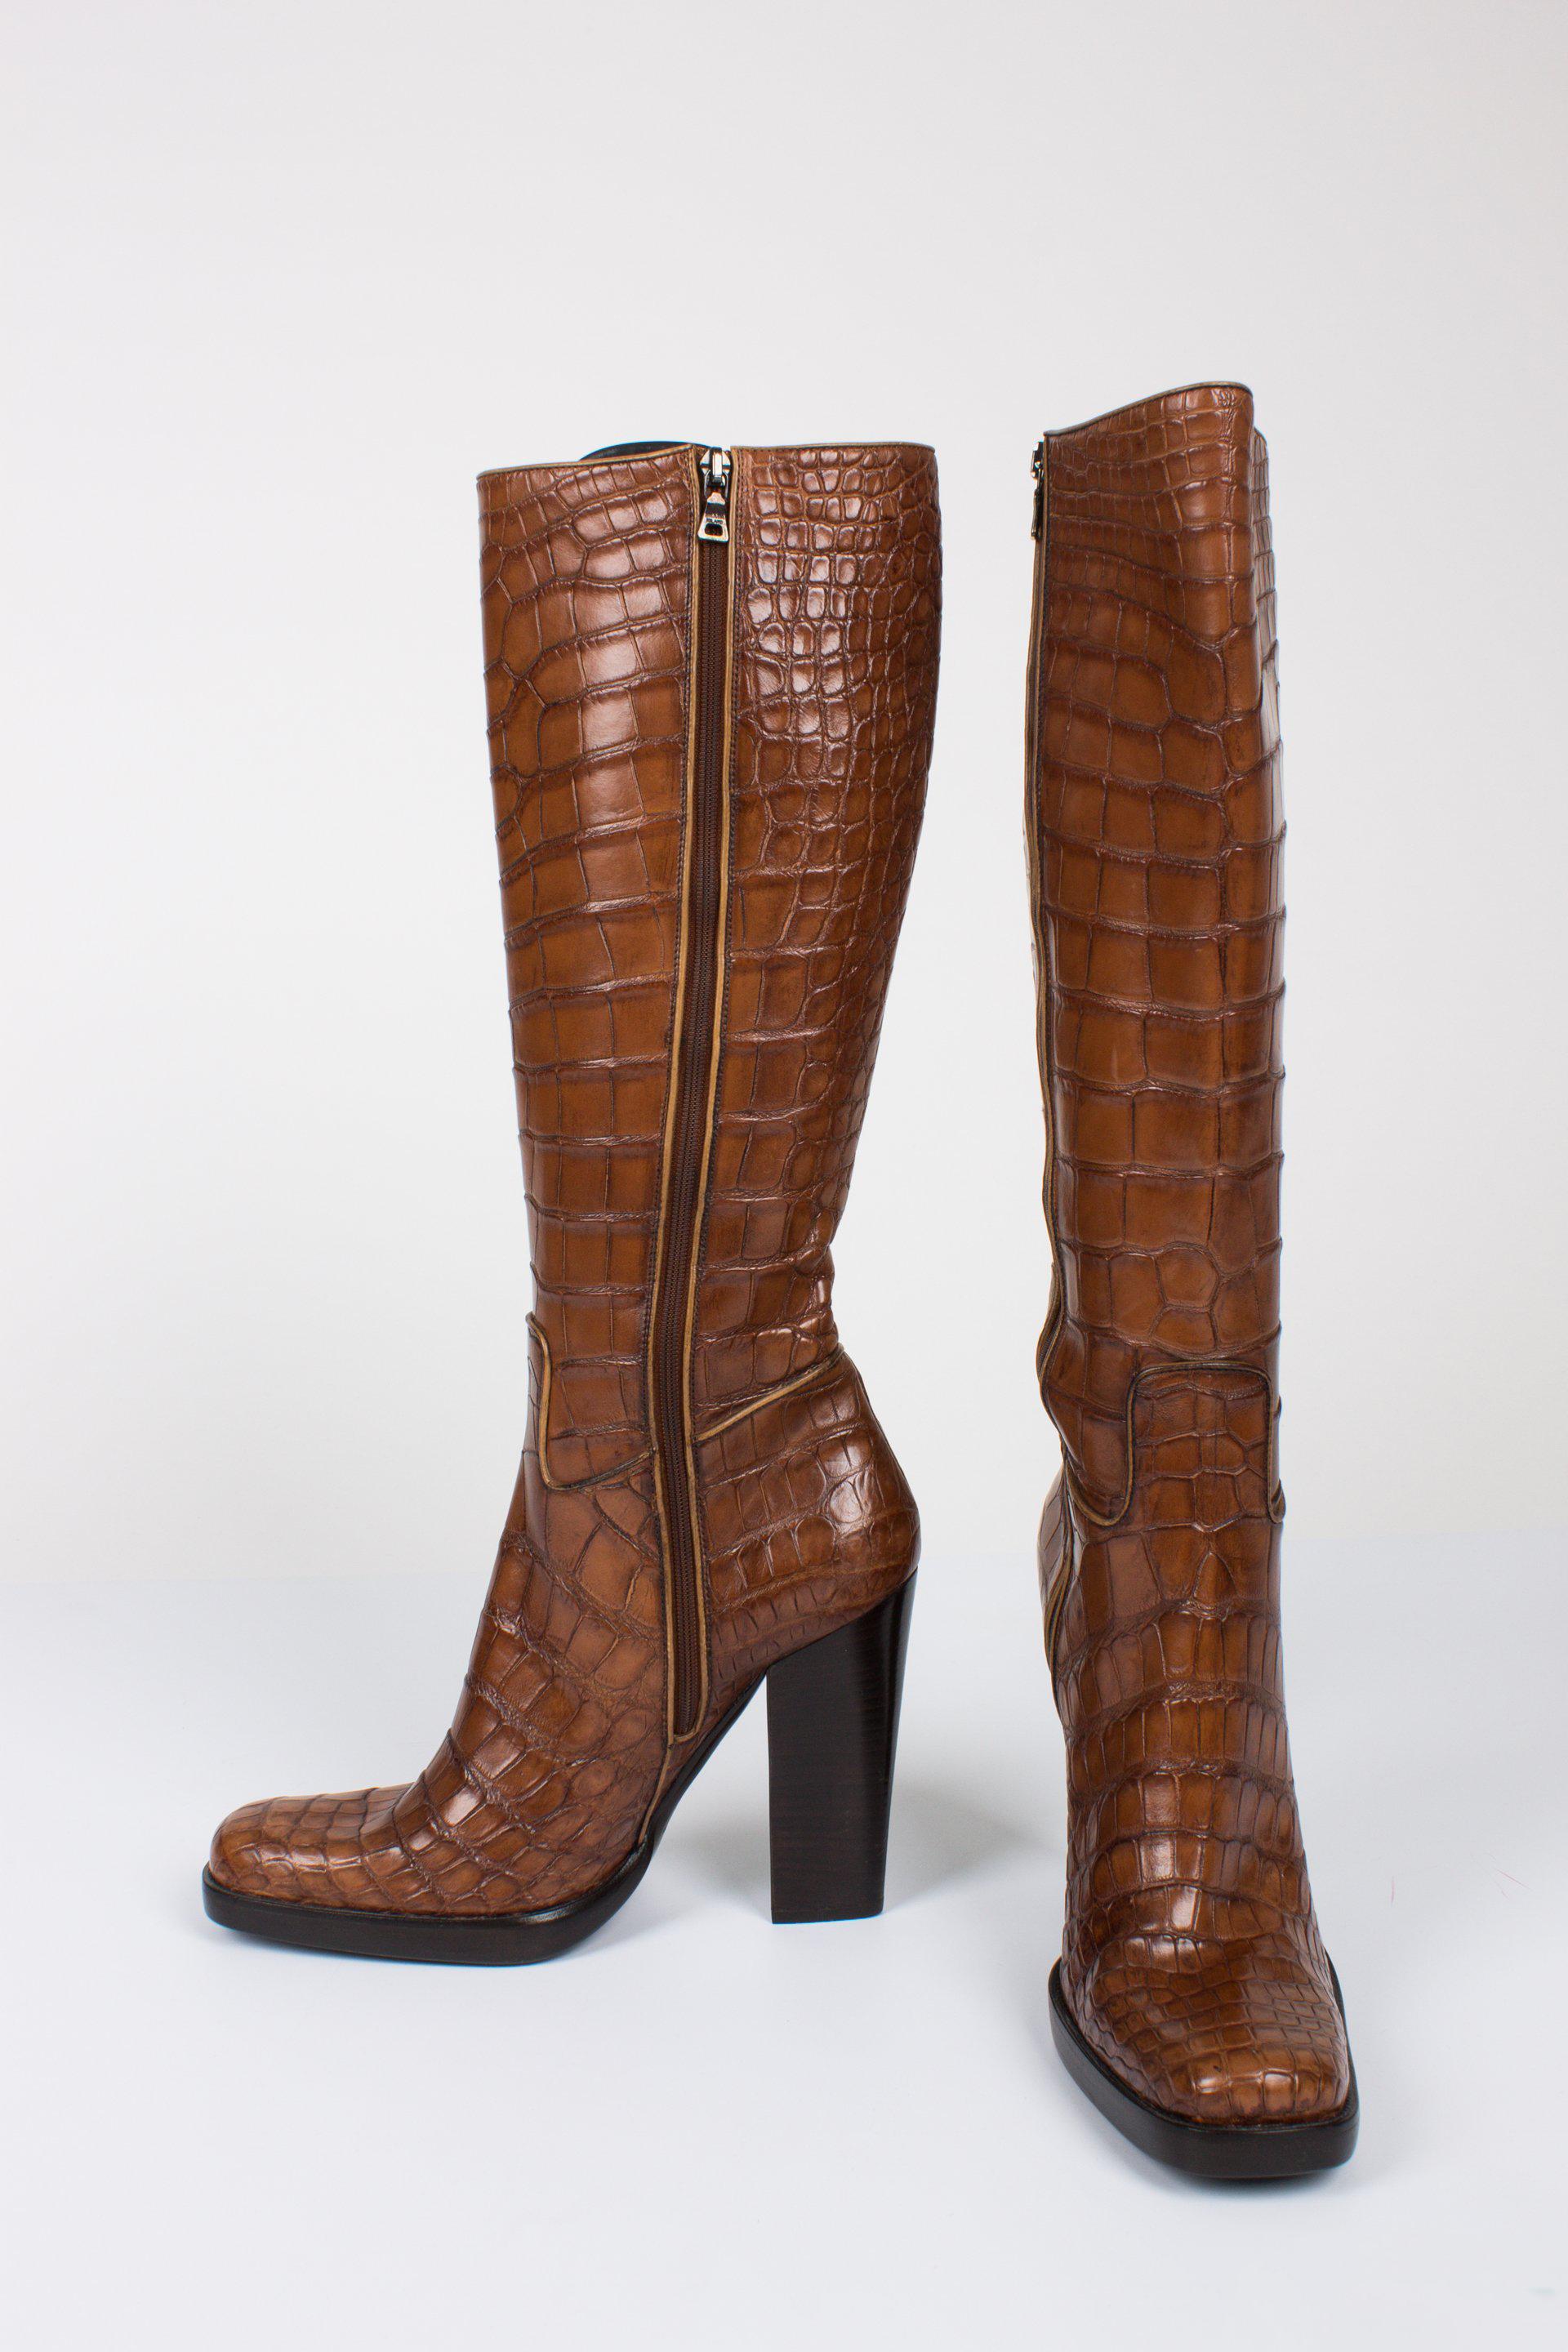 Light brown croco leather boots by Prada with a coarse heel.

These alligator booths have a zipper on the side, the heel measures 12,5 centimeters and the leather sole is 1,5 centimeters high. Fully lined with smooth light brown leather.

New